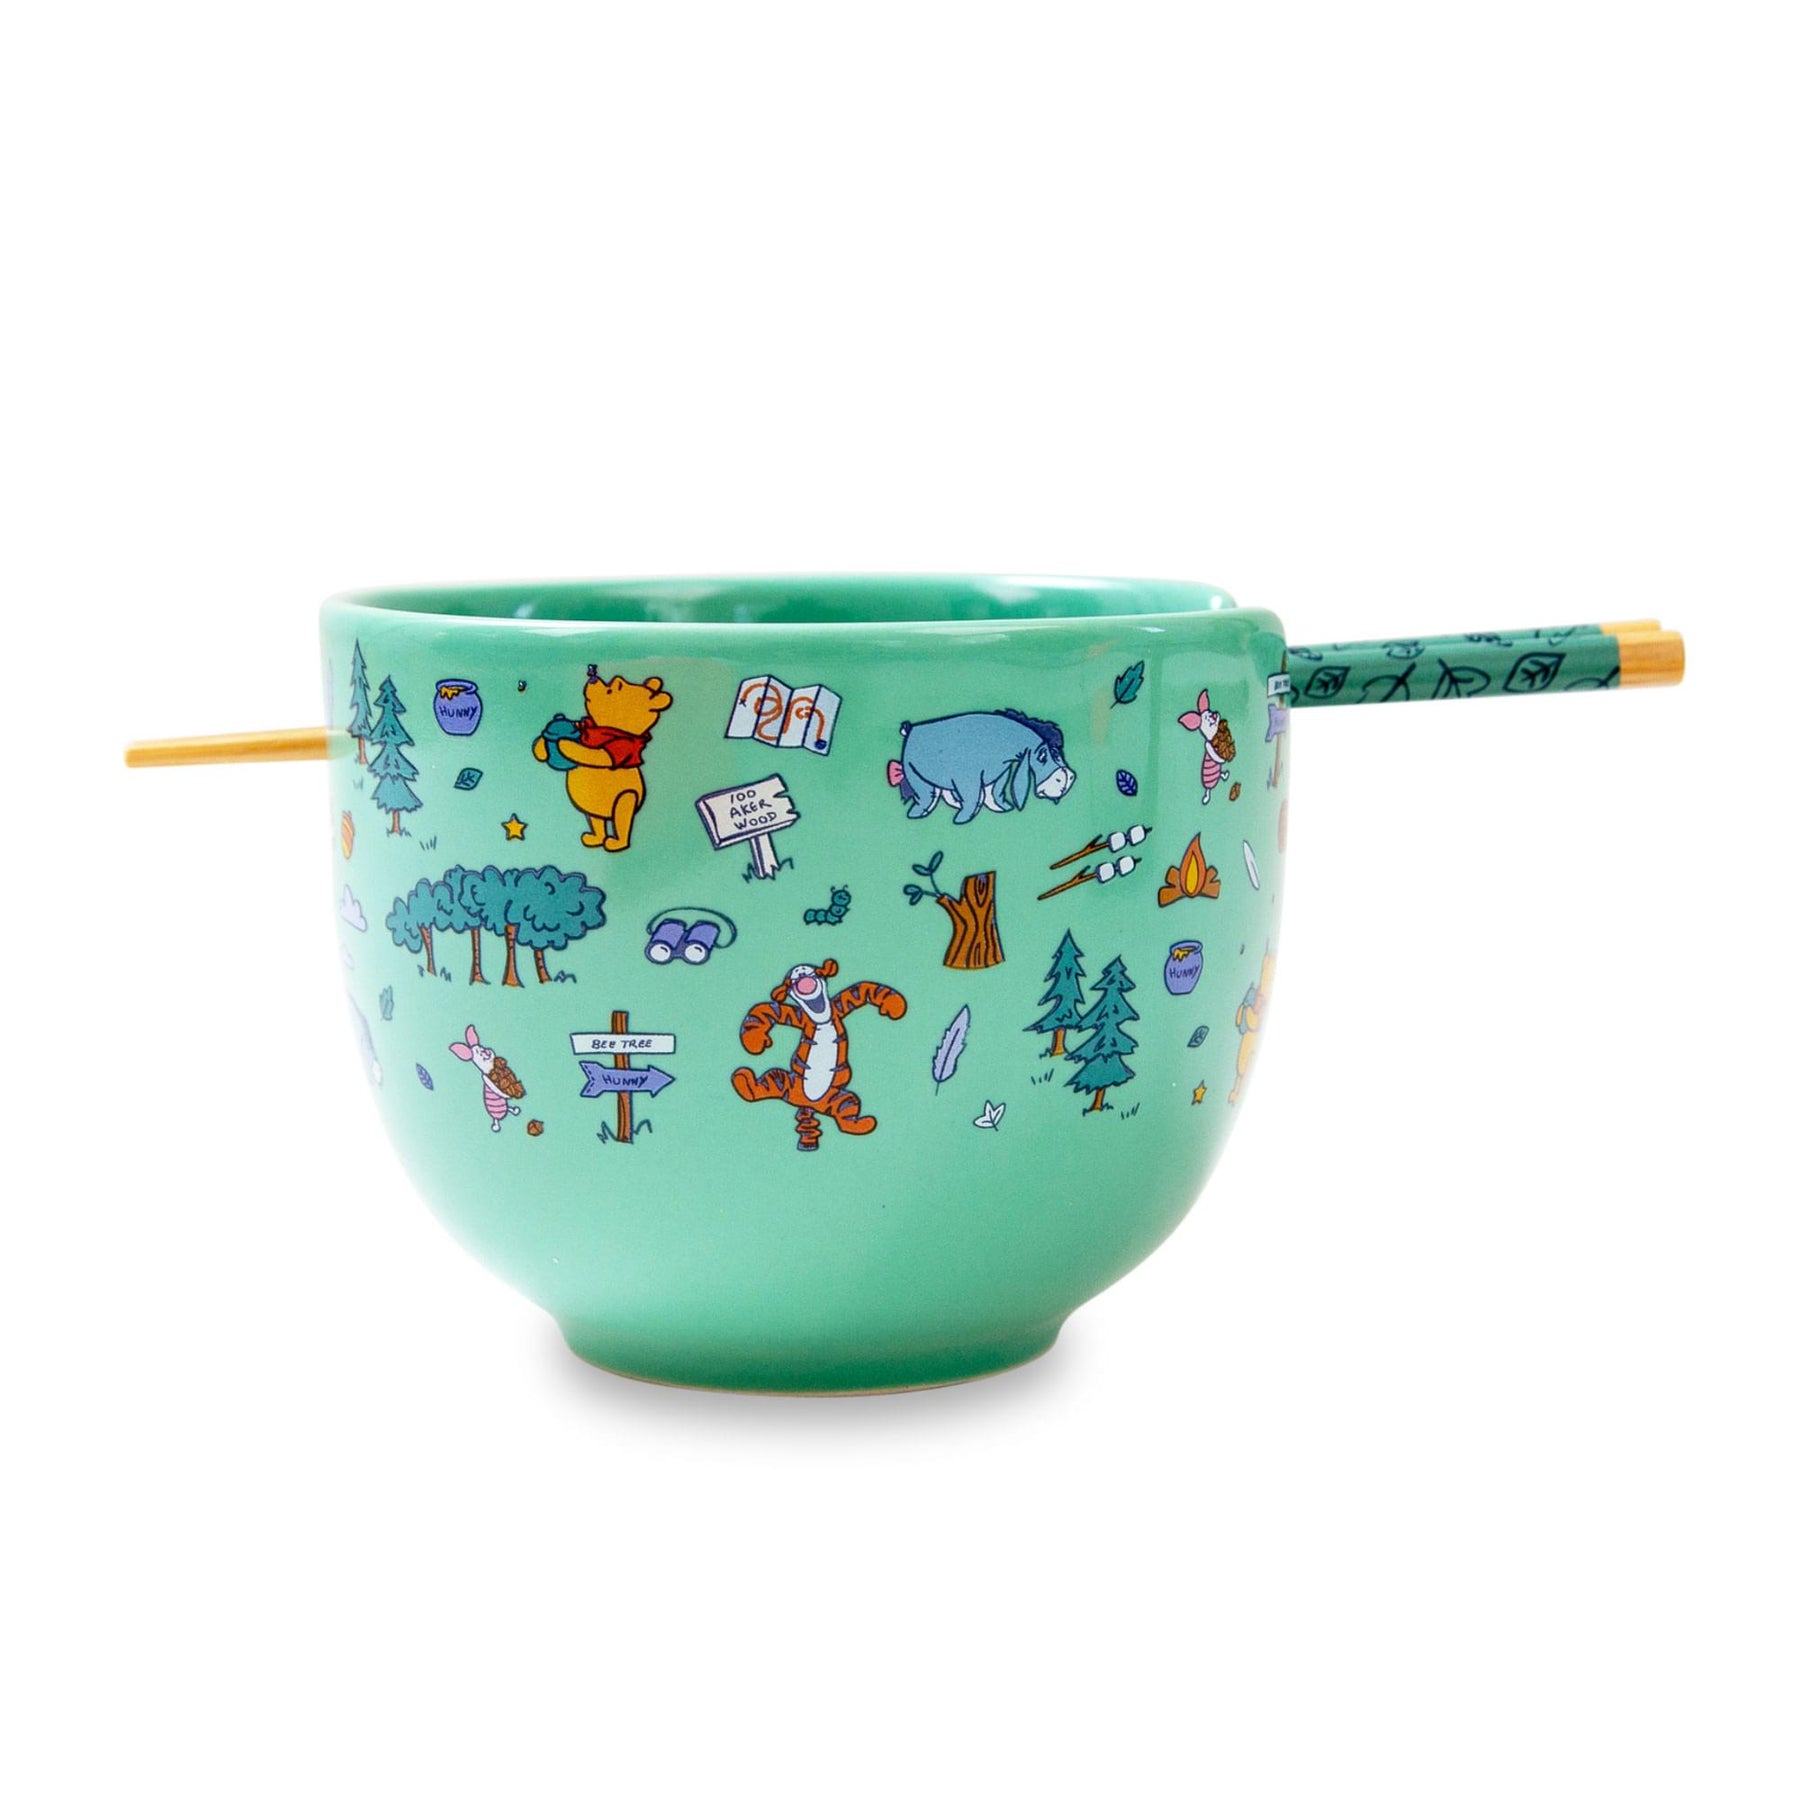 Disney Winnie the Pooh Allover Icons 20-Ounce Ramen Bowl and Chopstick Set